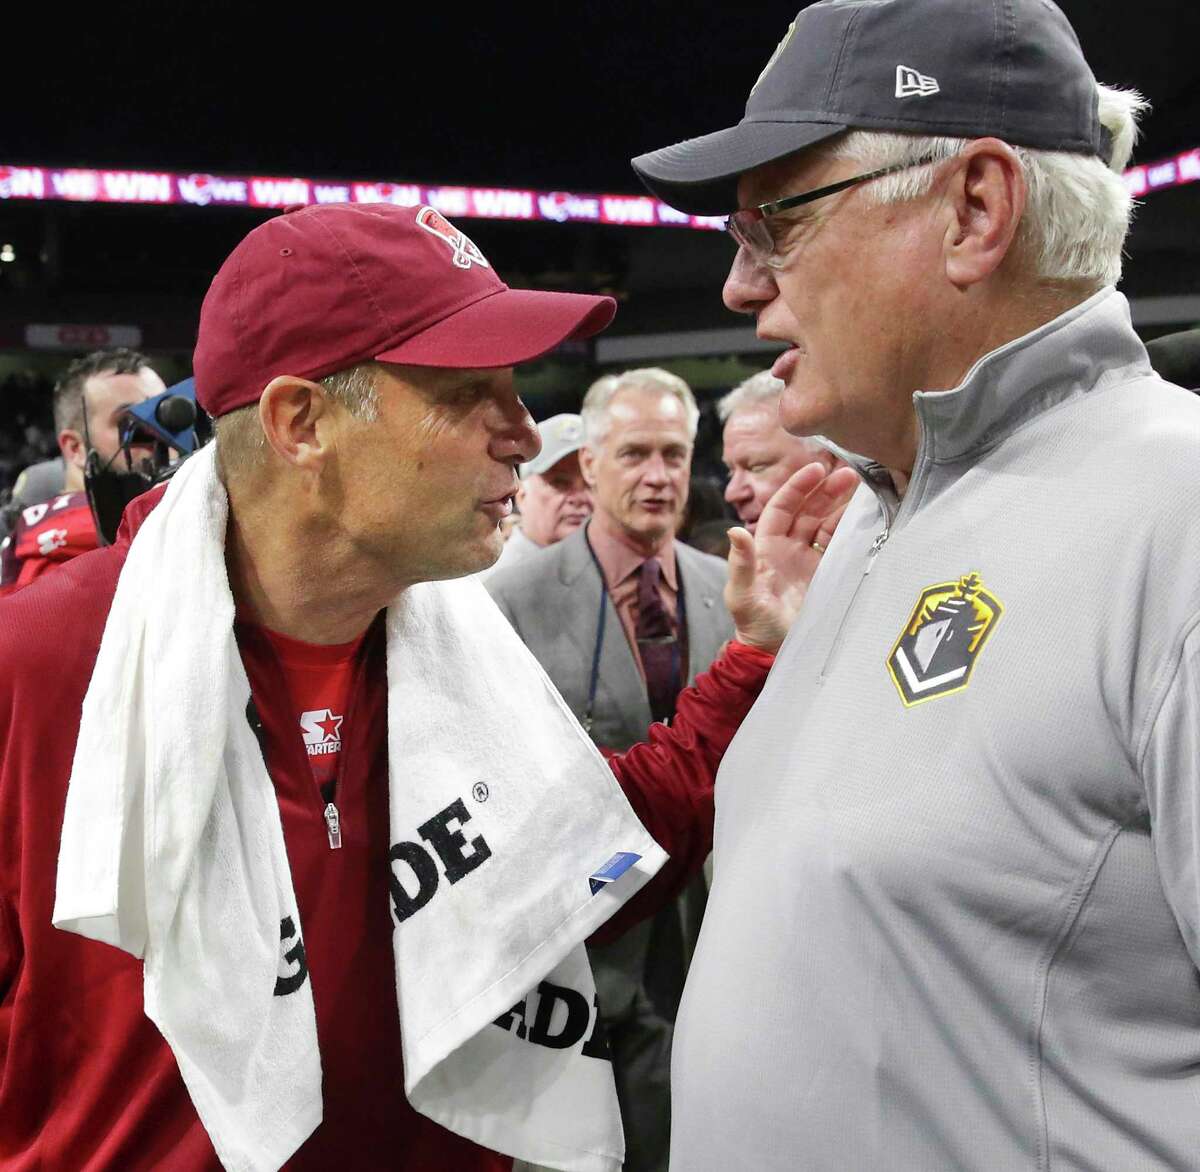 SanAntonio coach Mike Riley meets Fleet coach Mike Martz after the game as the Commanders host San Diego at the Alamodome in the opening game for the Alliance of American Football league on February 9, 2019.